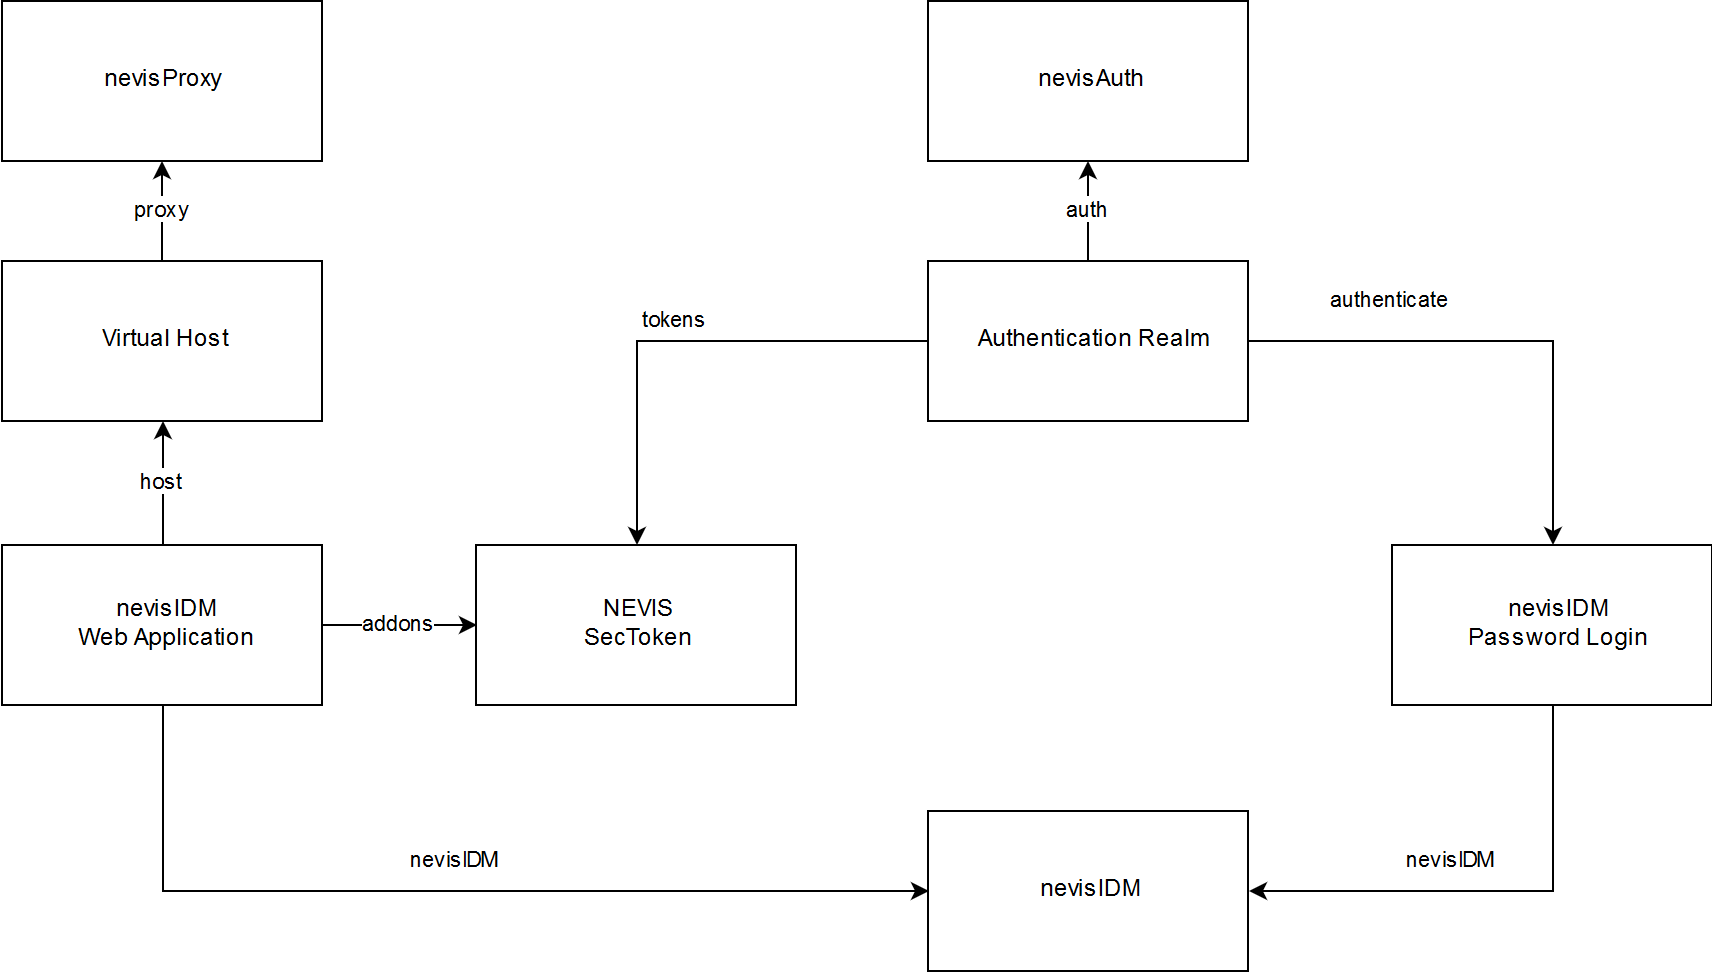 Patterns involved in configuring access to nevisIDM Web Application